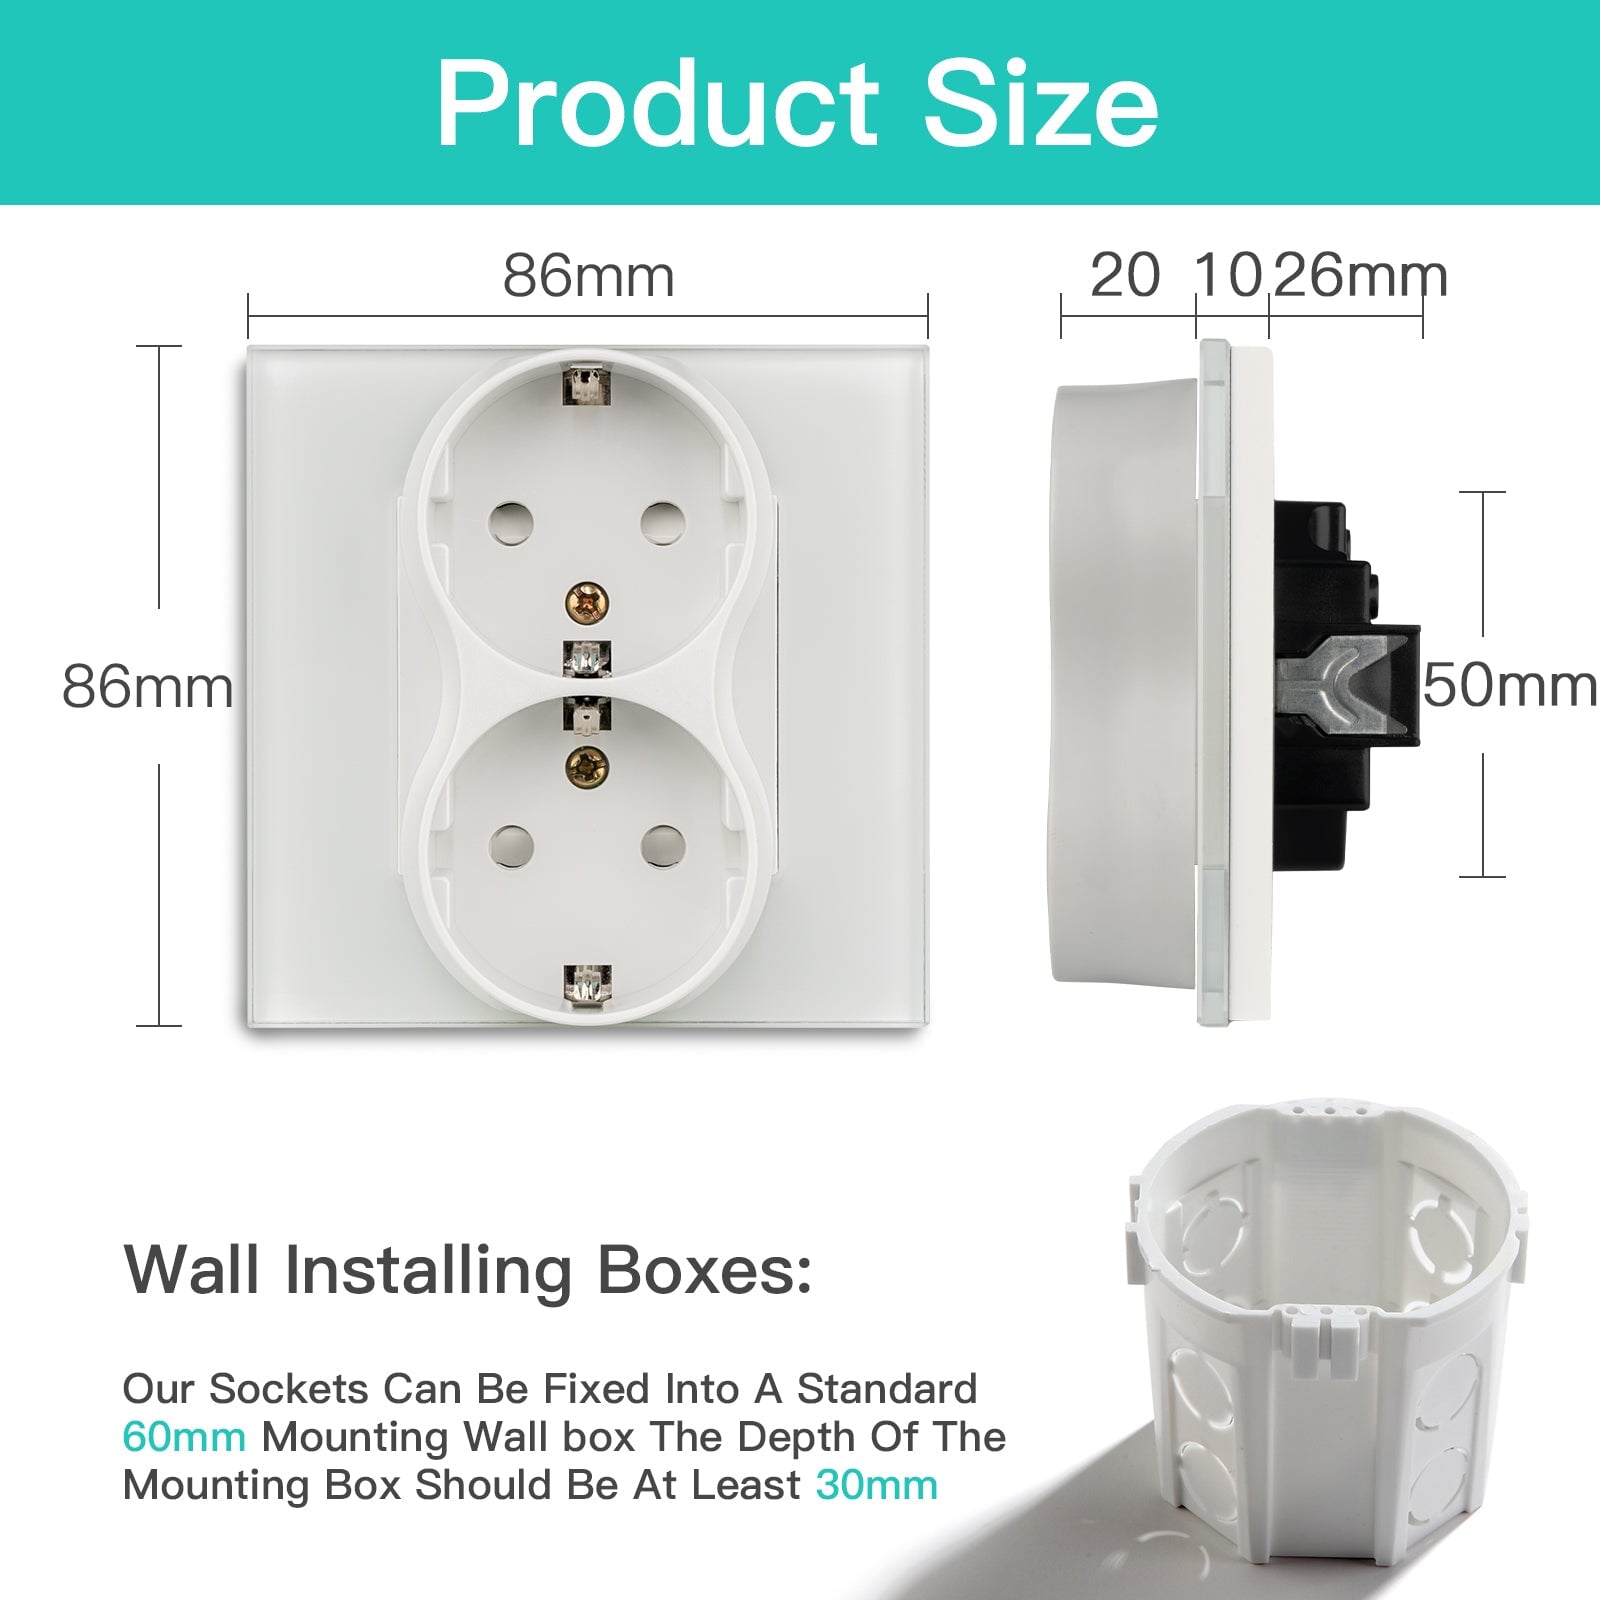 BSEED EU Double Sockets Power Wall Outlet Home Wall Power Sockets Glass Panel Power Outlets & Sockets Bseedswitch 